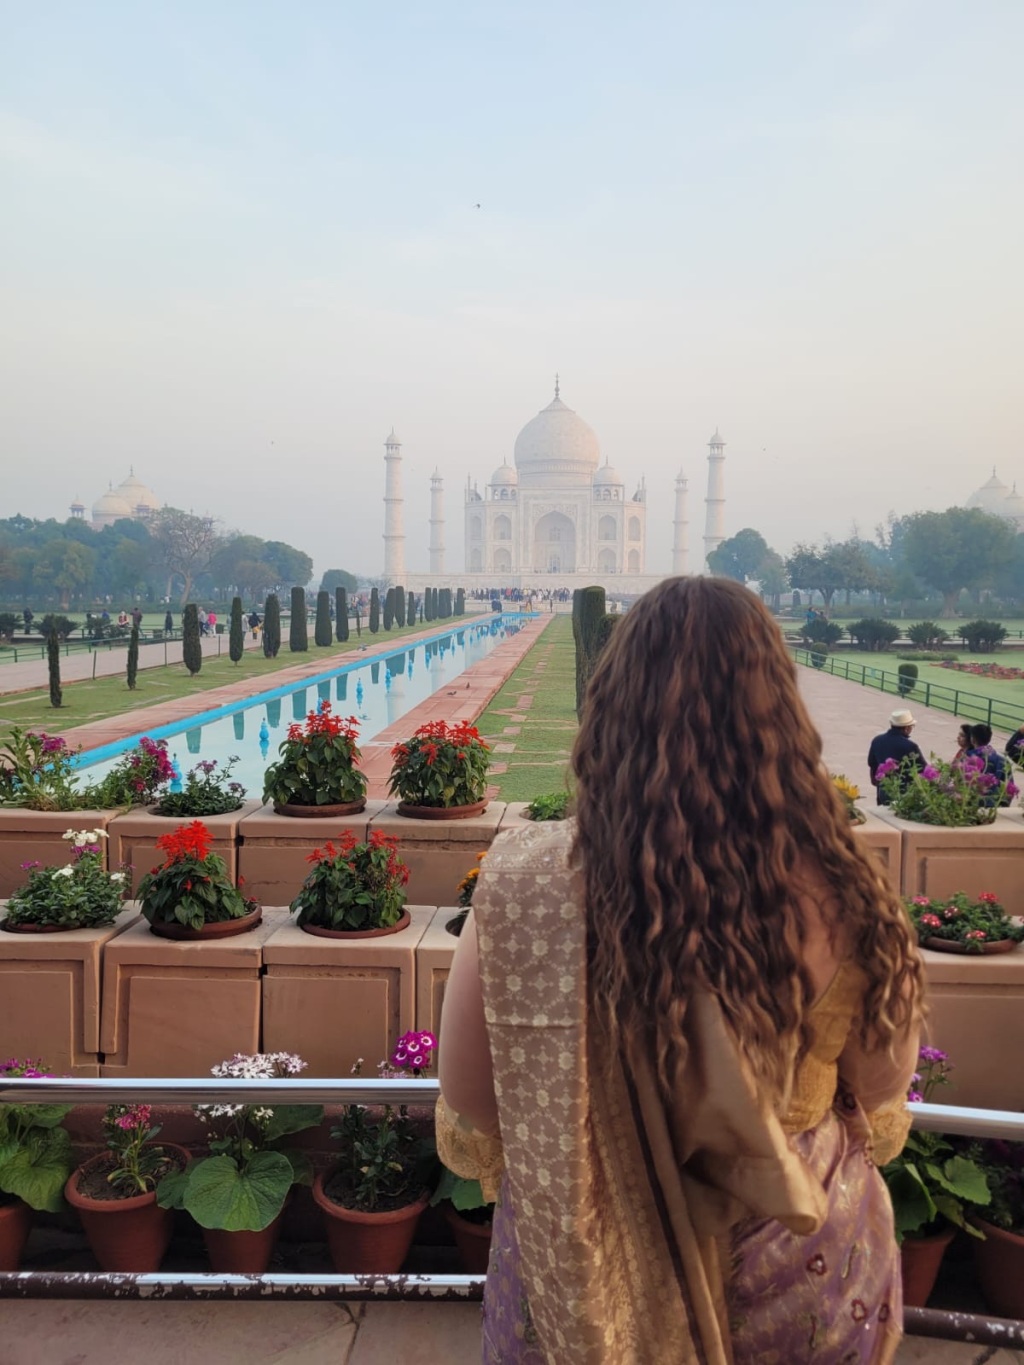 Image of me in a purple and gold saree stood facing the Taj Mahal in the background